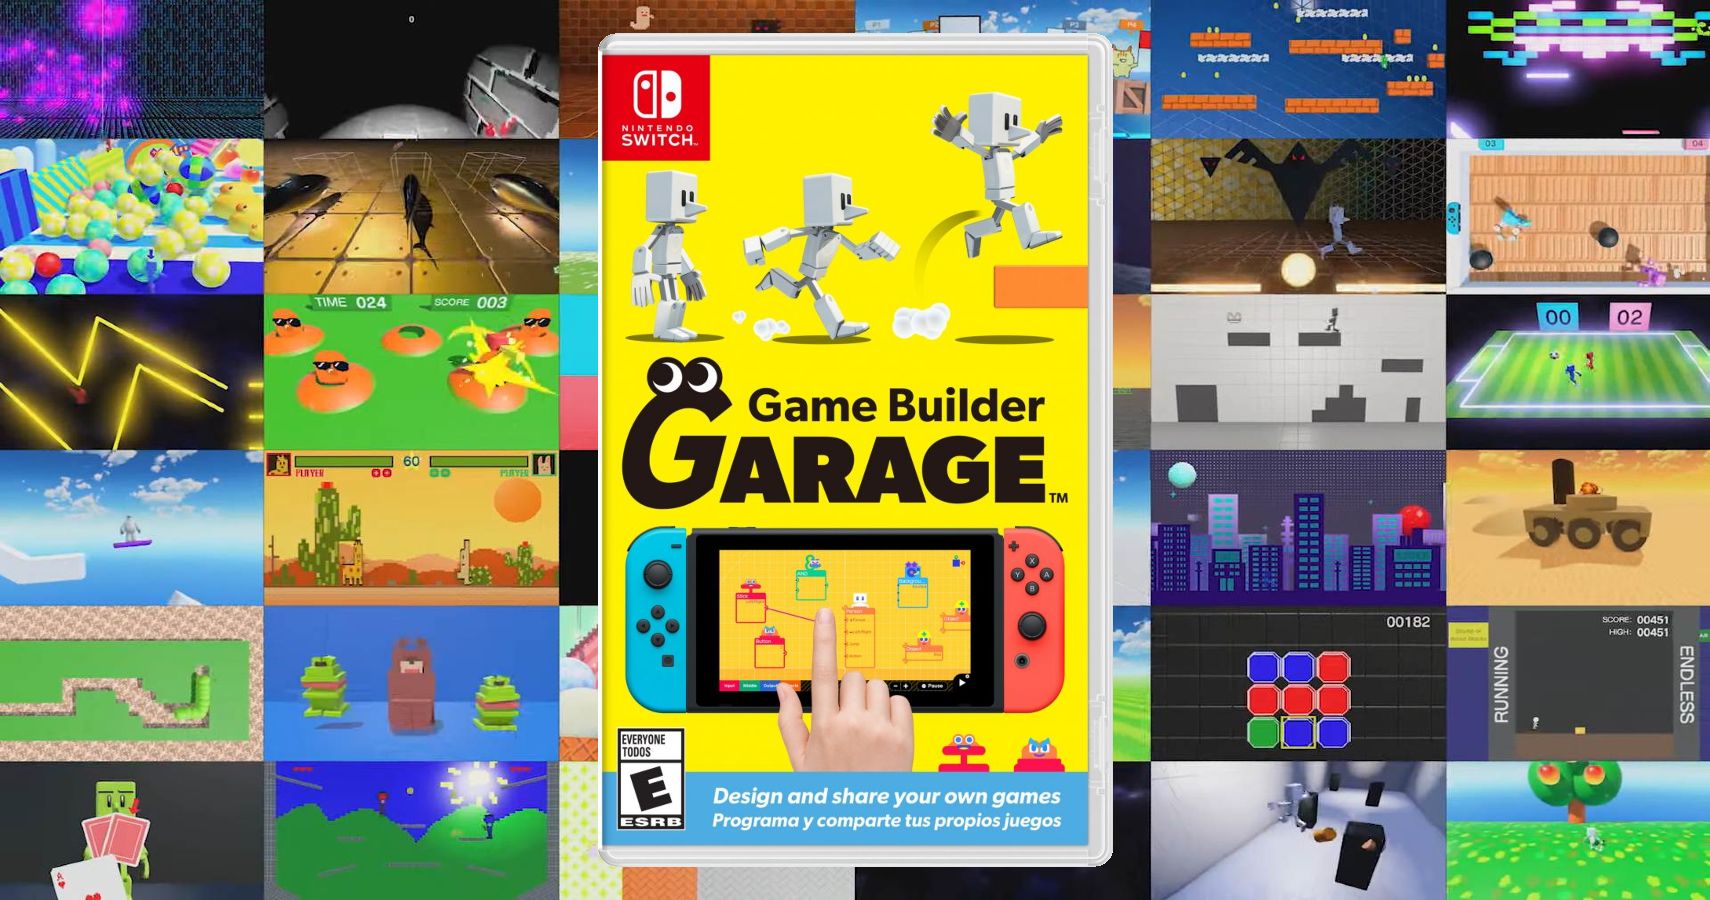 Make Builder You Nintendo Own Games Announces Garage, Switch Game Which Your Lets